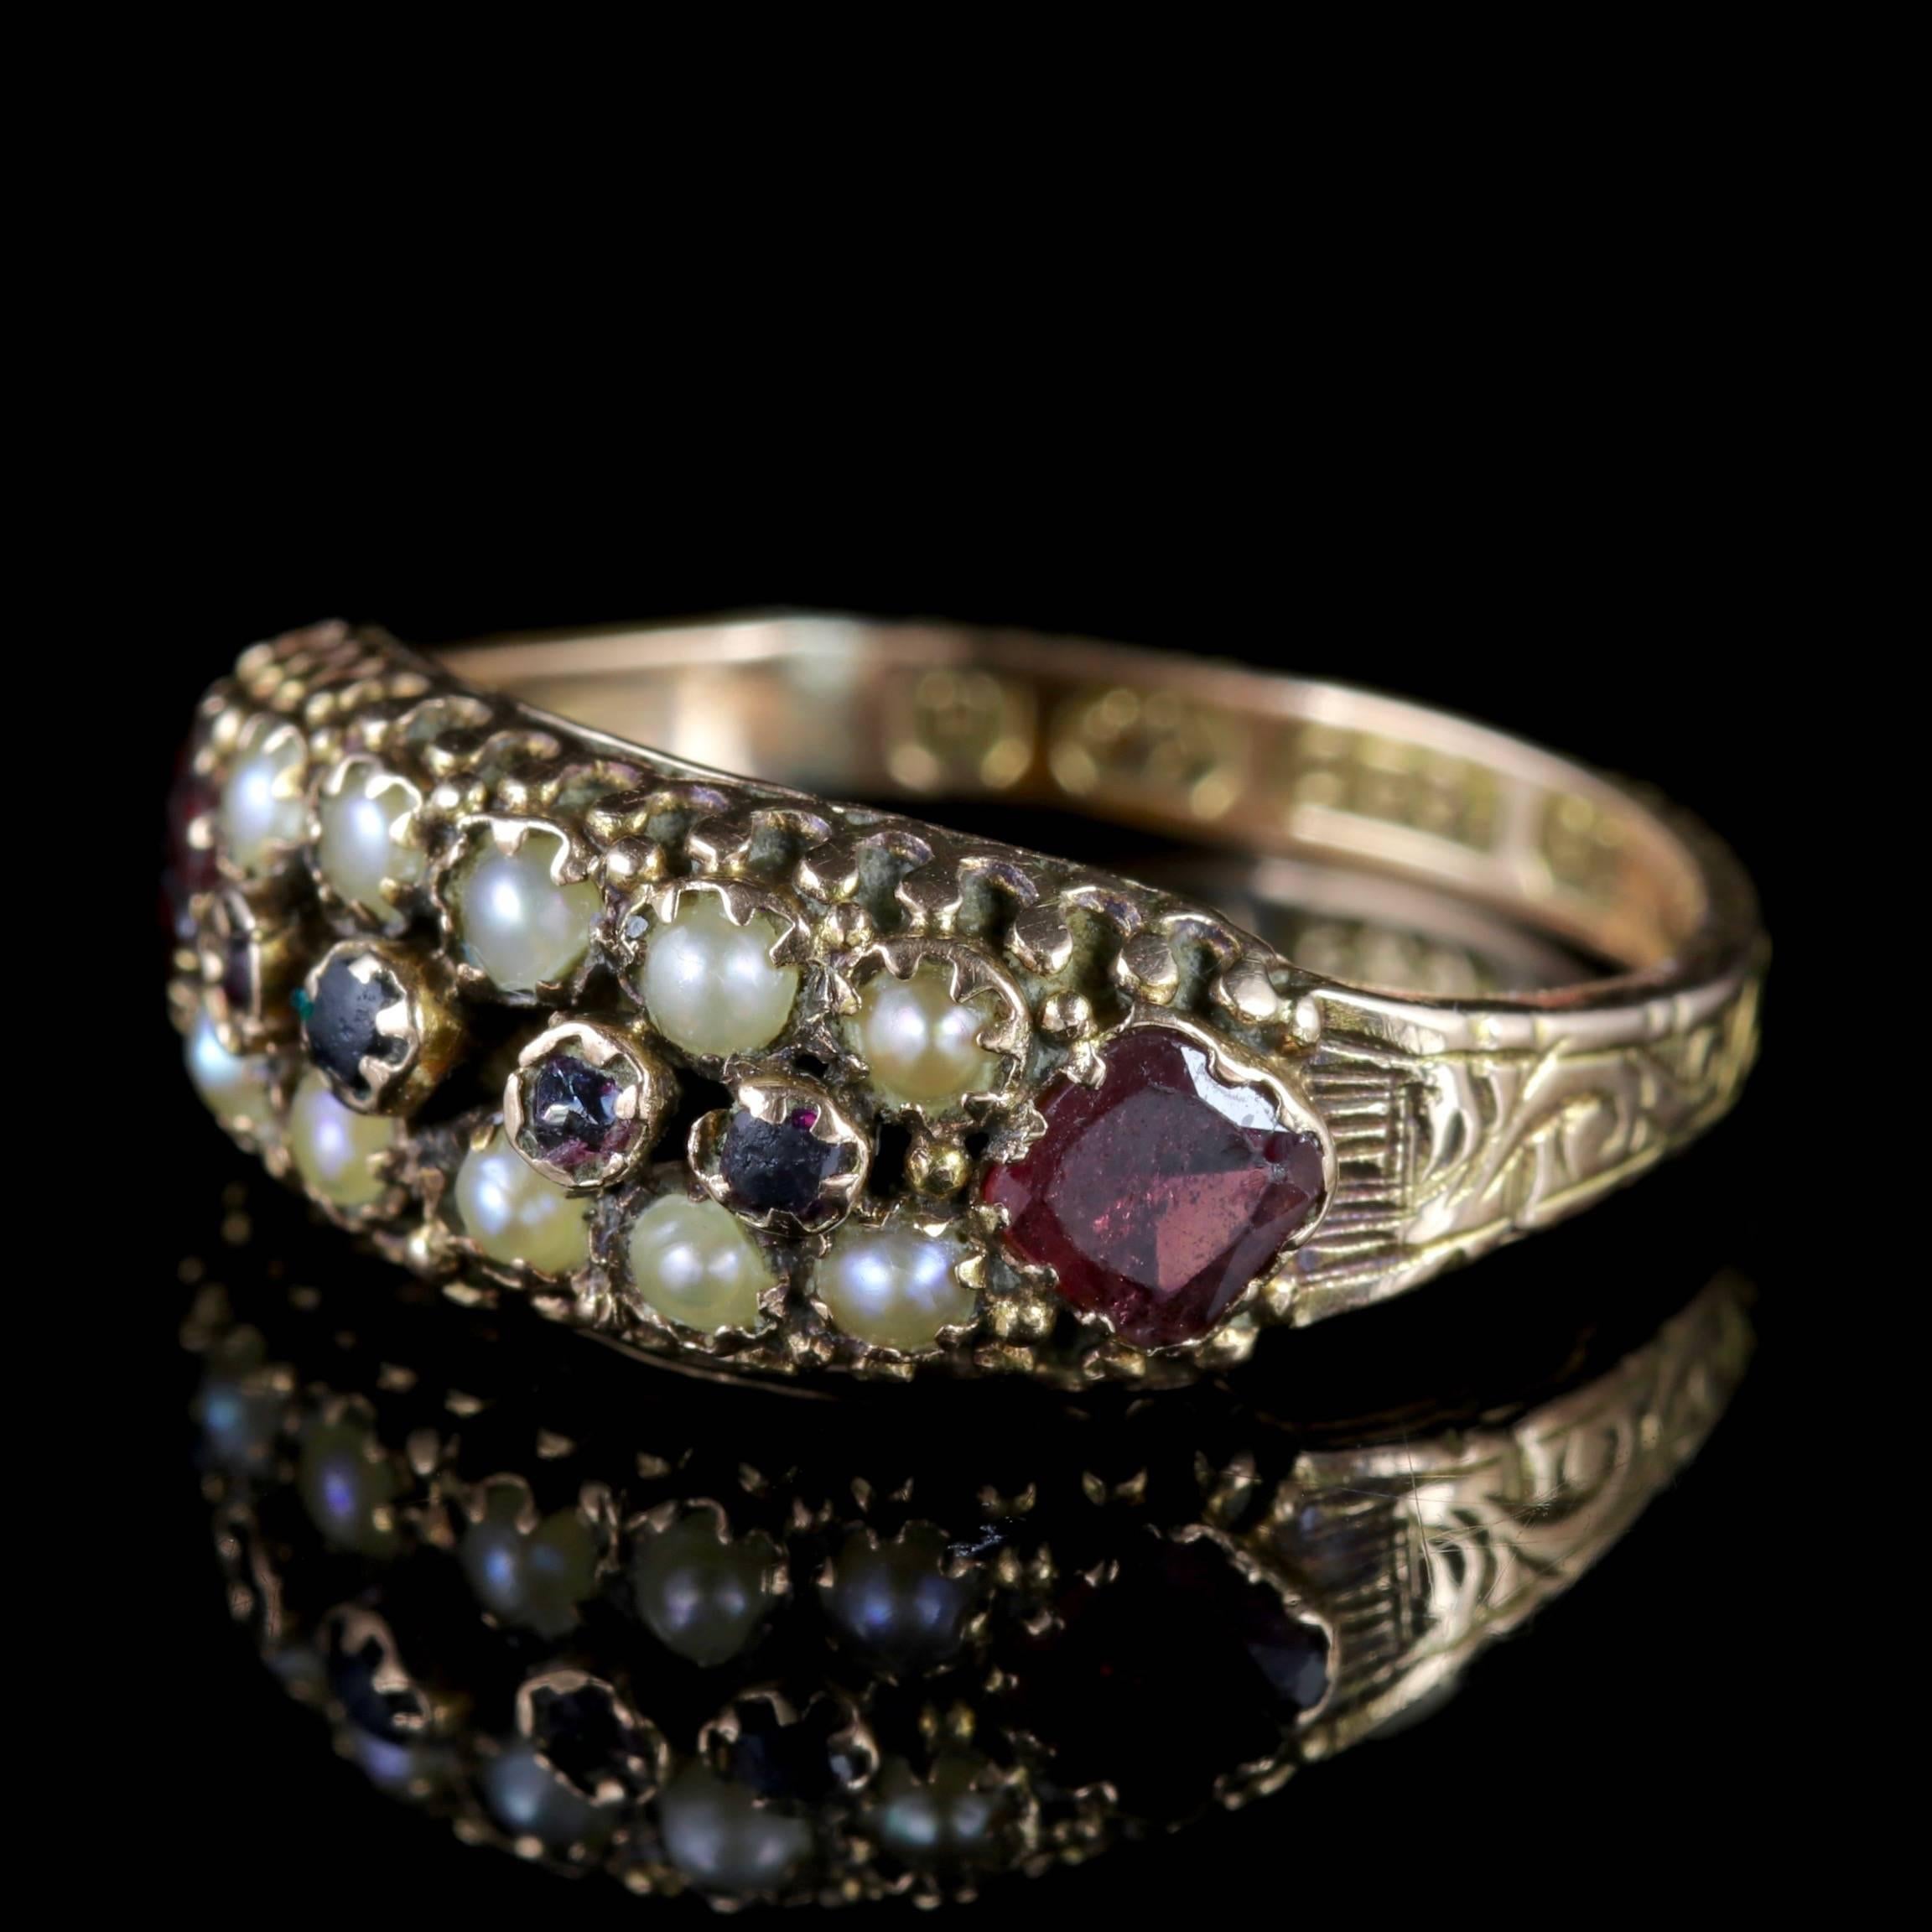 To read more please click continue reading below-

This stunning 15ct Gold antique Garnet and Pearl Cluster ring is Victorian Circa 1900. 

The ring is set with rich Almandine Garnet’s and creamy Pearls in an 15ct Yellow Gold Victorian gallery.